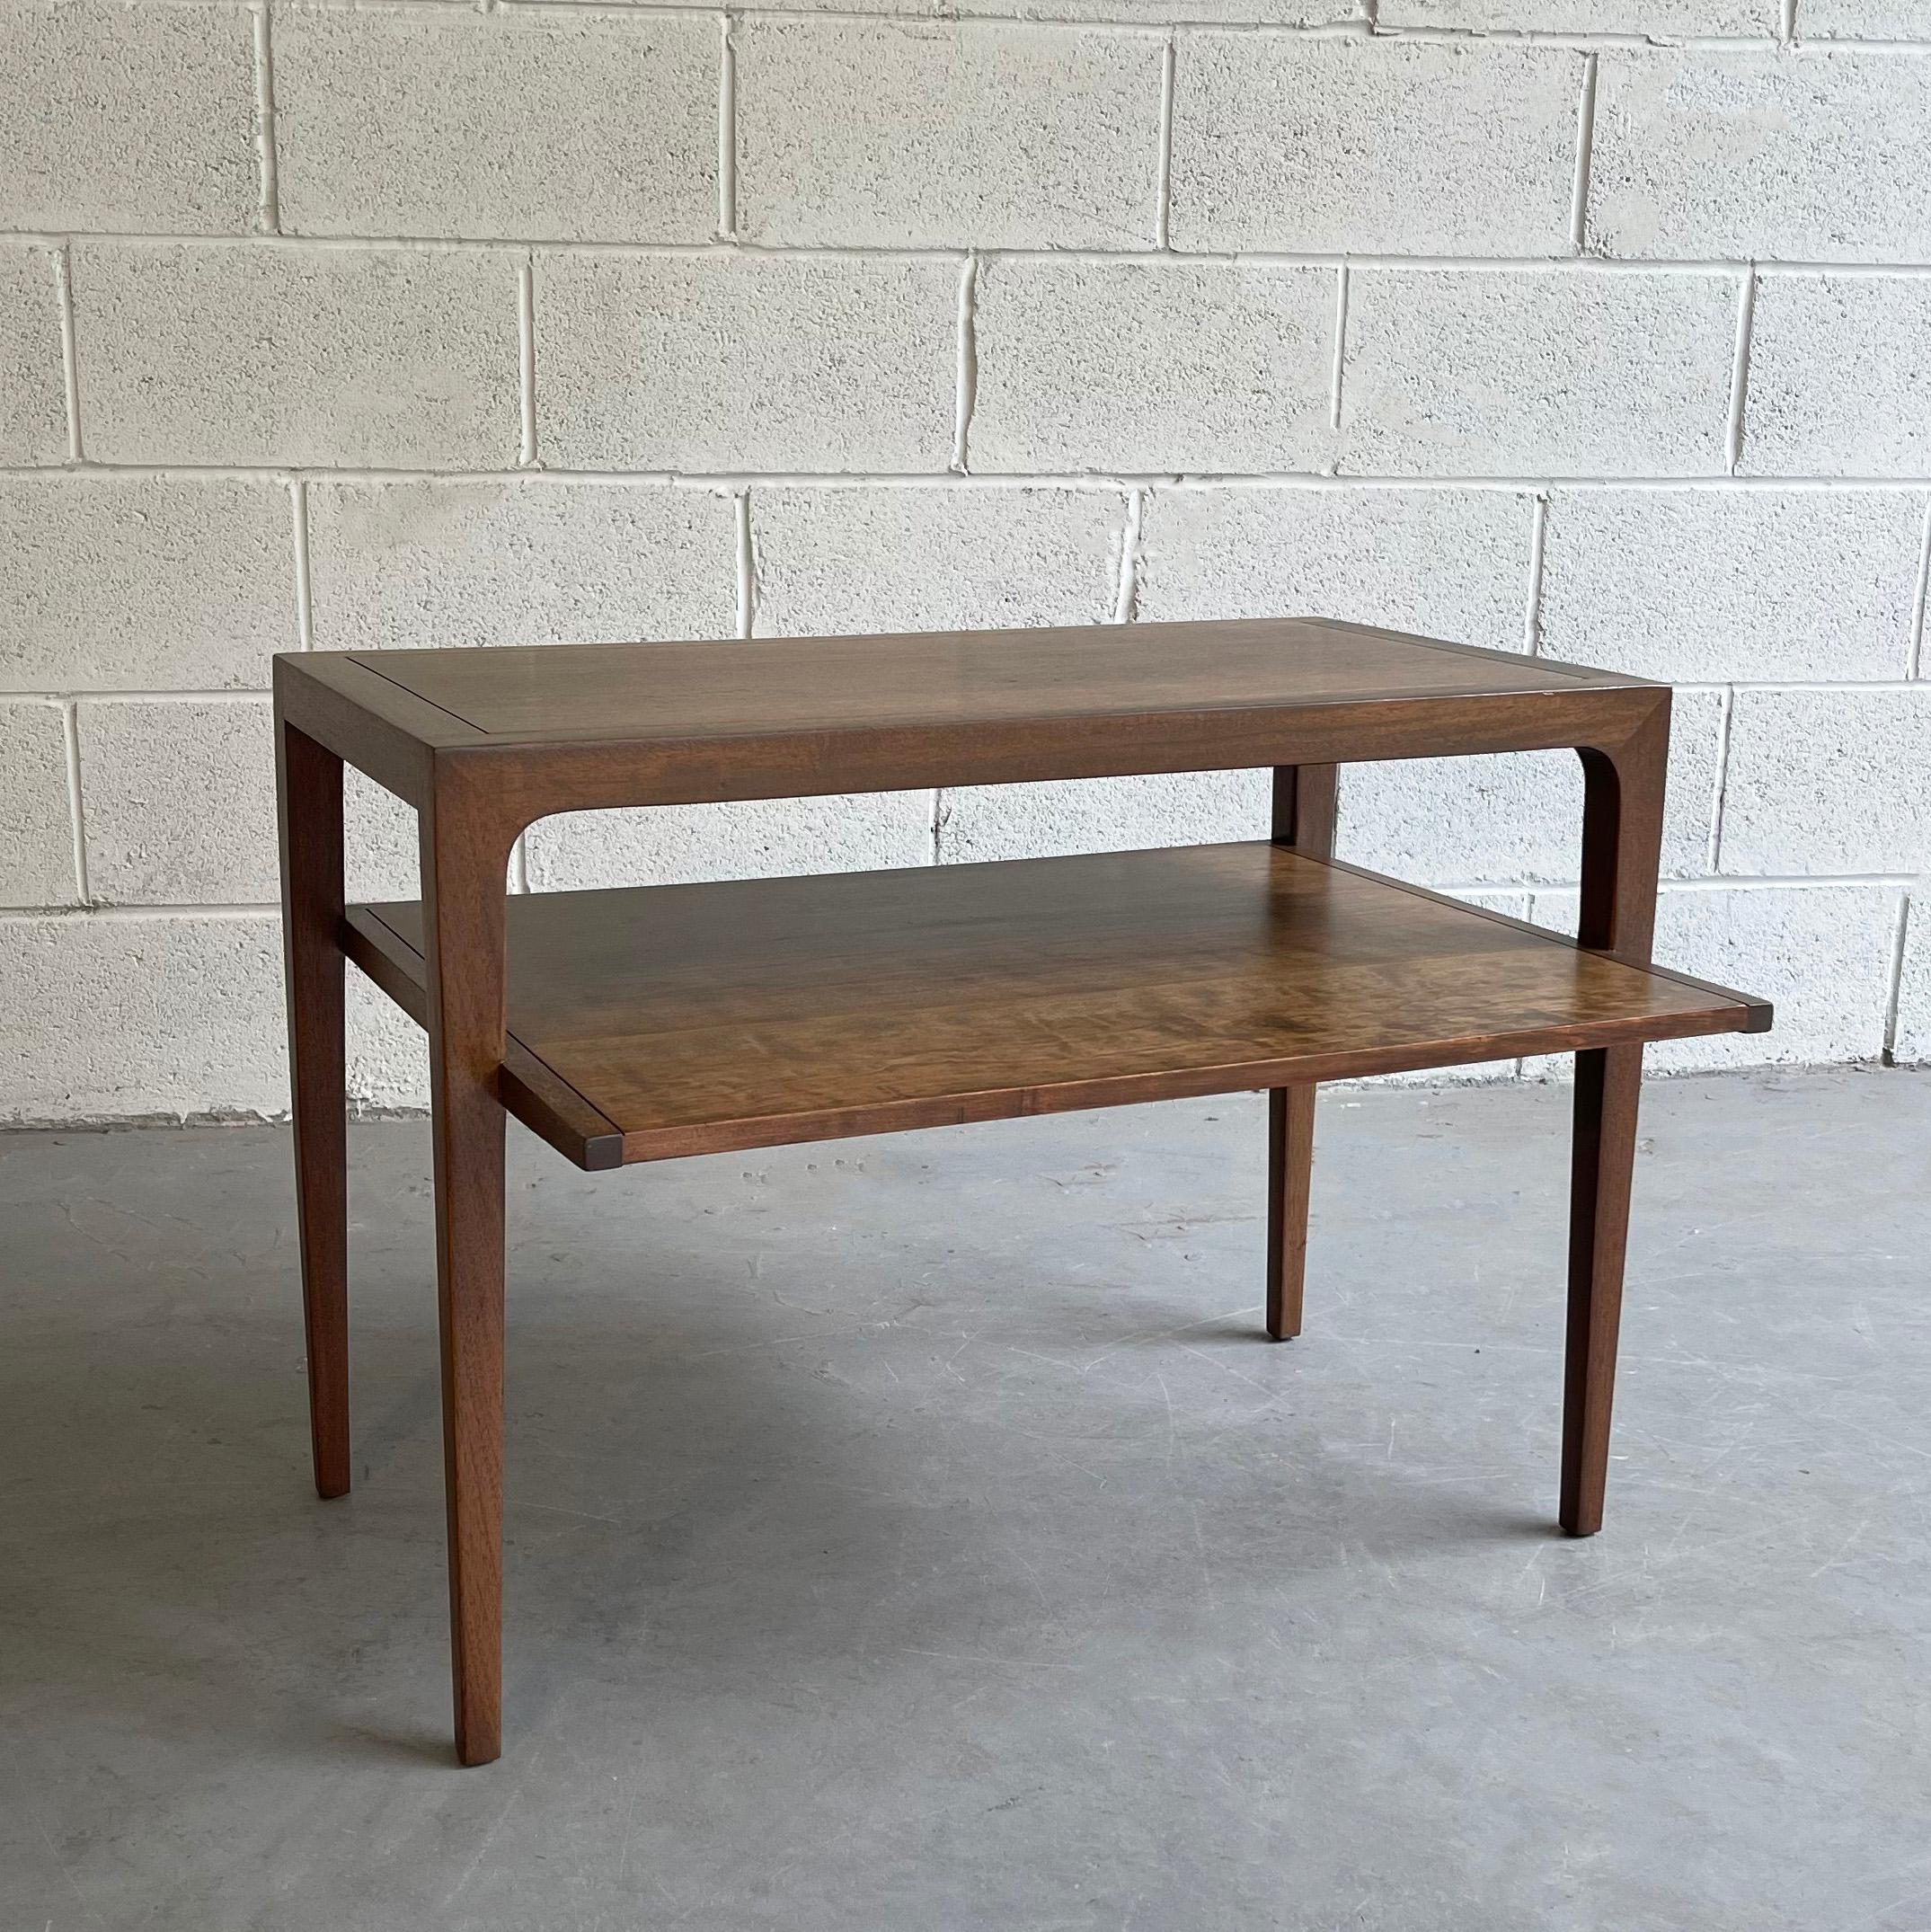 Versatile, Mid-Century Modern, ash side table by John Van Koert for Drexel Counterpoint features a protruding lower level at 15.75 inches ht.